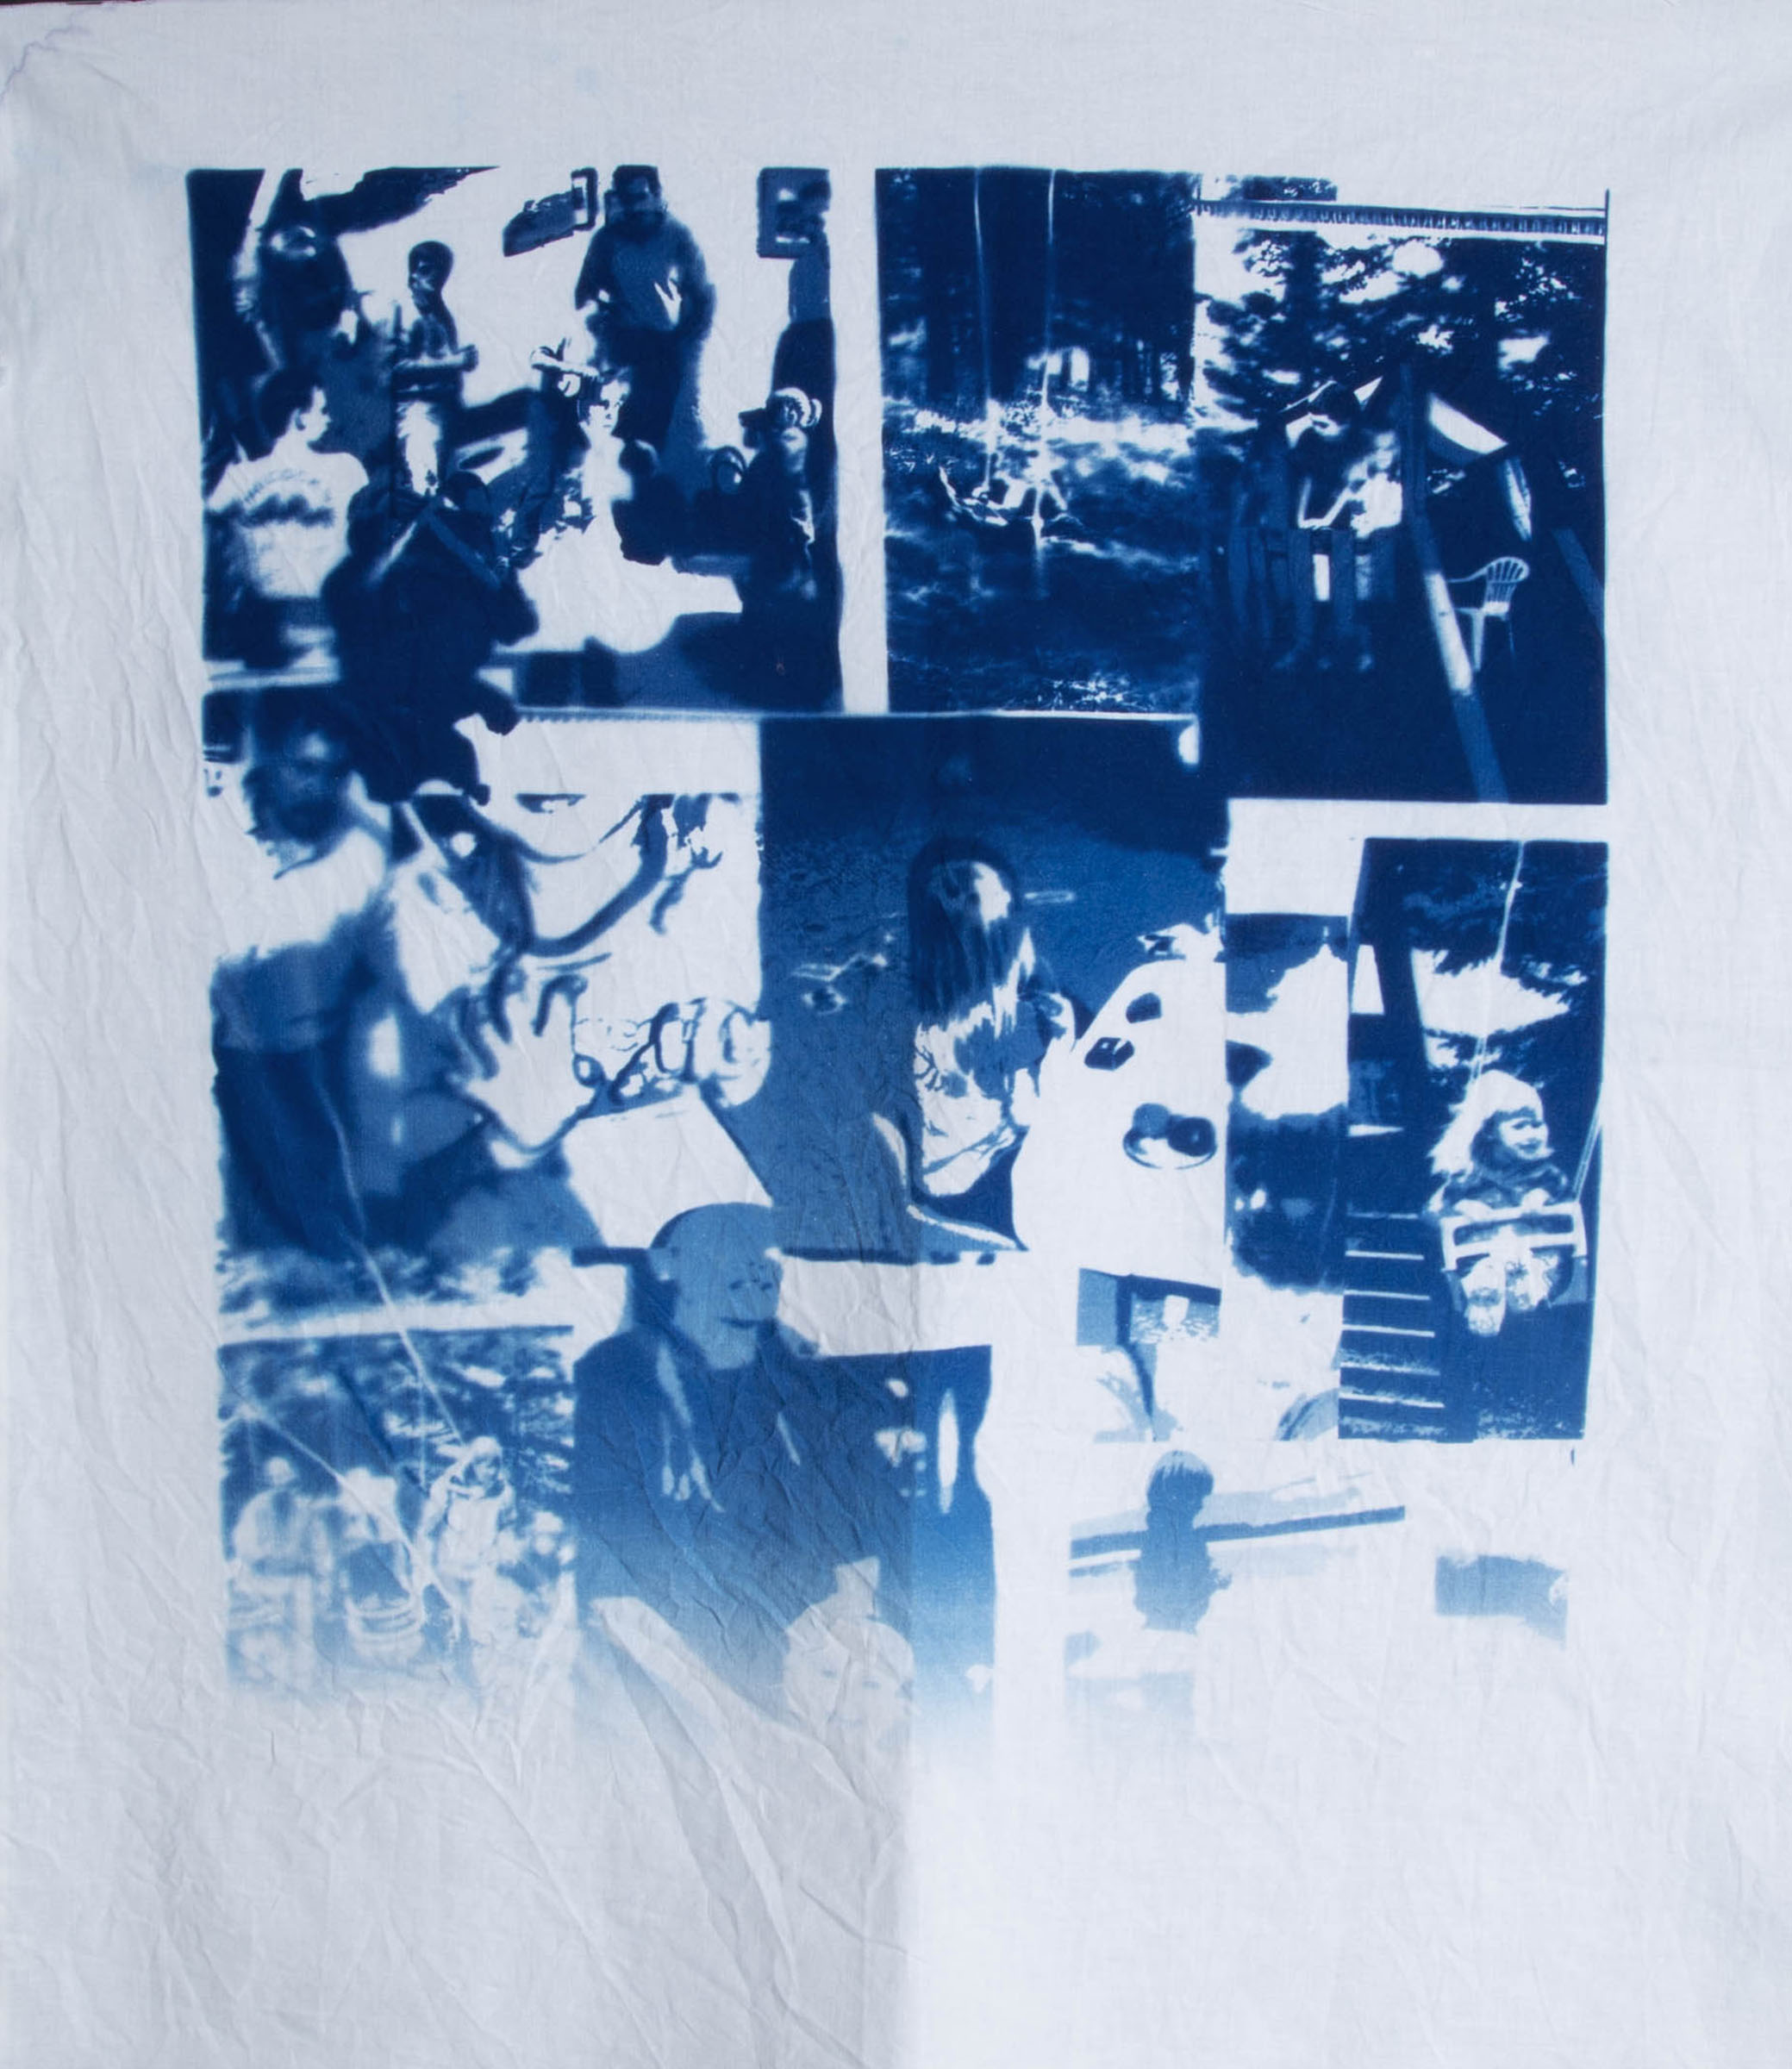 Blue cyanotype print on fabric of collaged childhood images